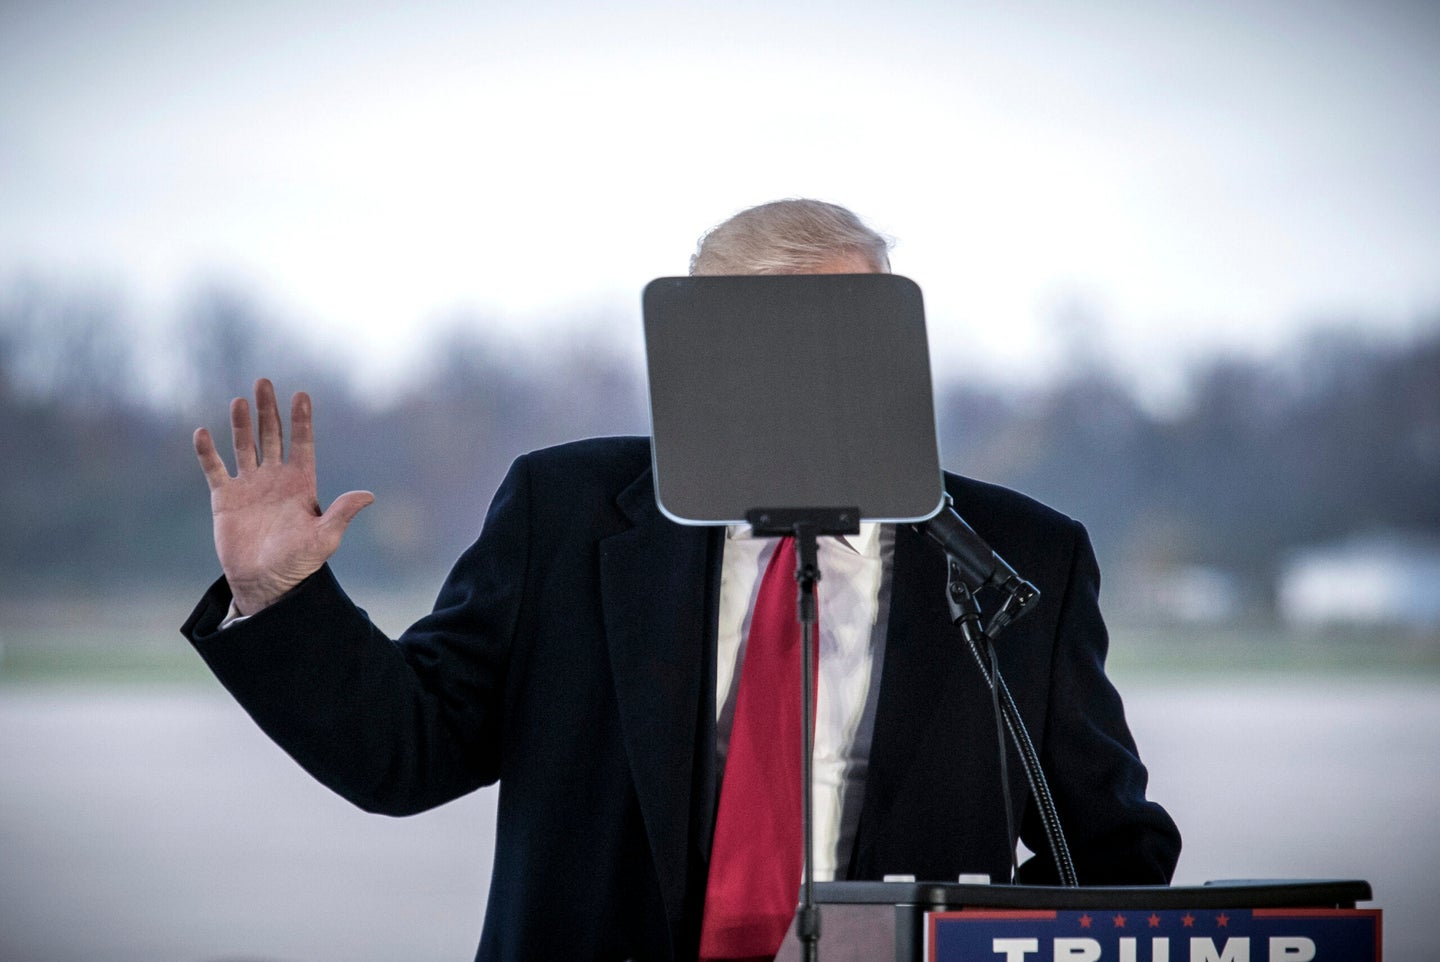 Candidate Donald Trump obscured by a teleprompter, Ohio, early November 2016